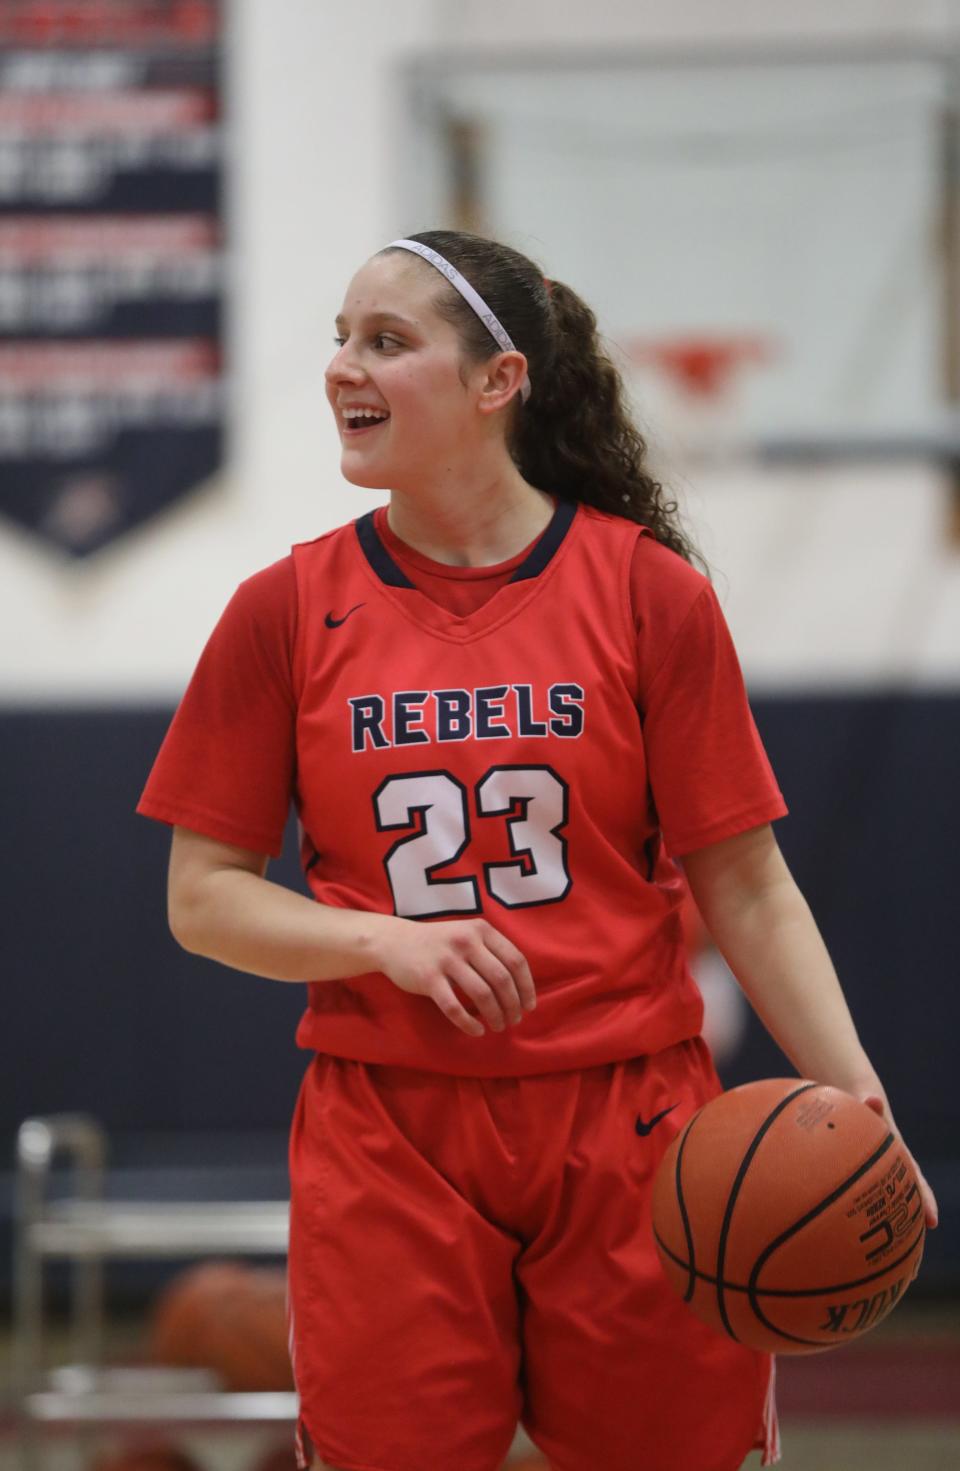 Michelle Sidor of Upper Saddle River is on the Michigan basketball team headed to March Madness. While playing for Saddle River Day, she became the fourth girl in New Jersey high school basketball history to score 3,000 points.